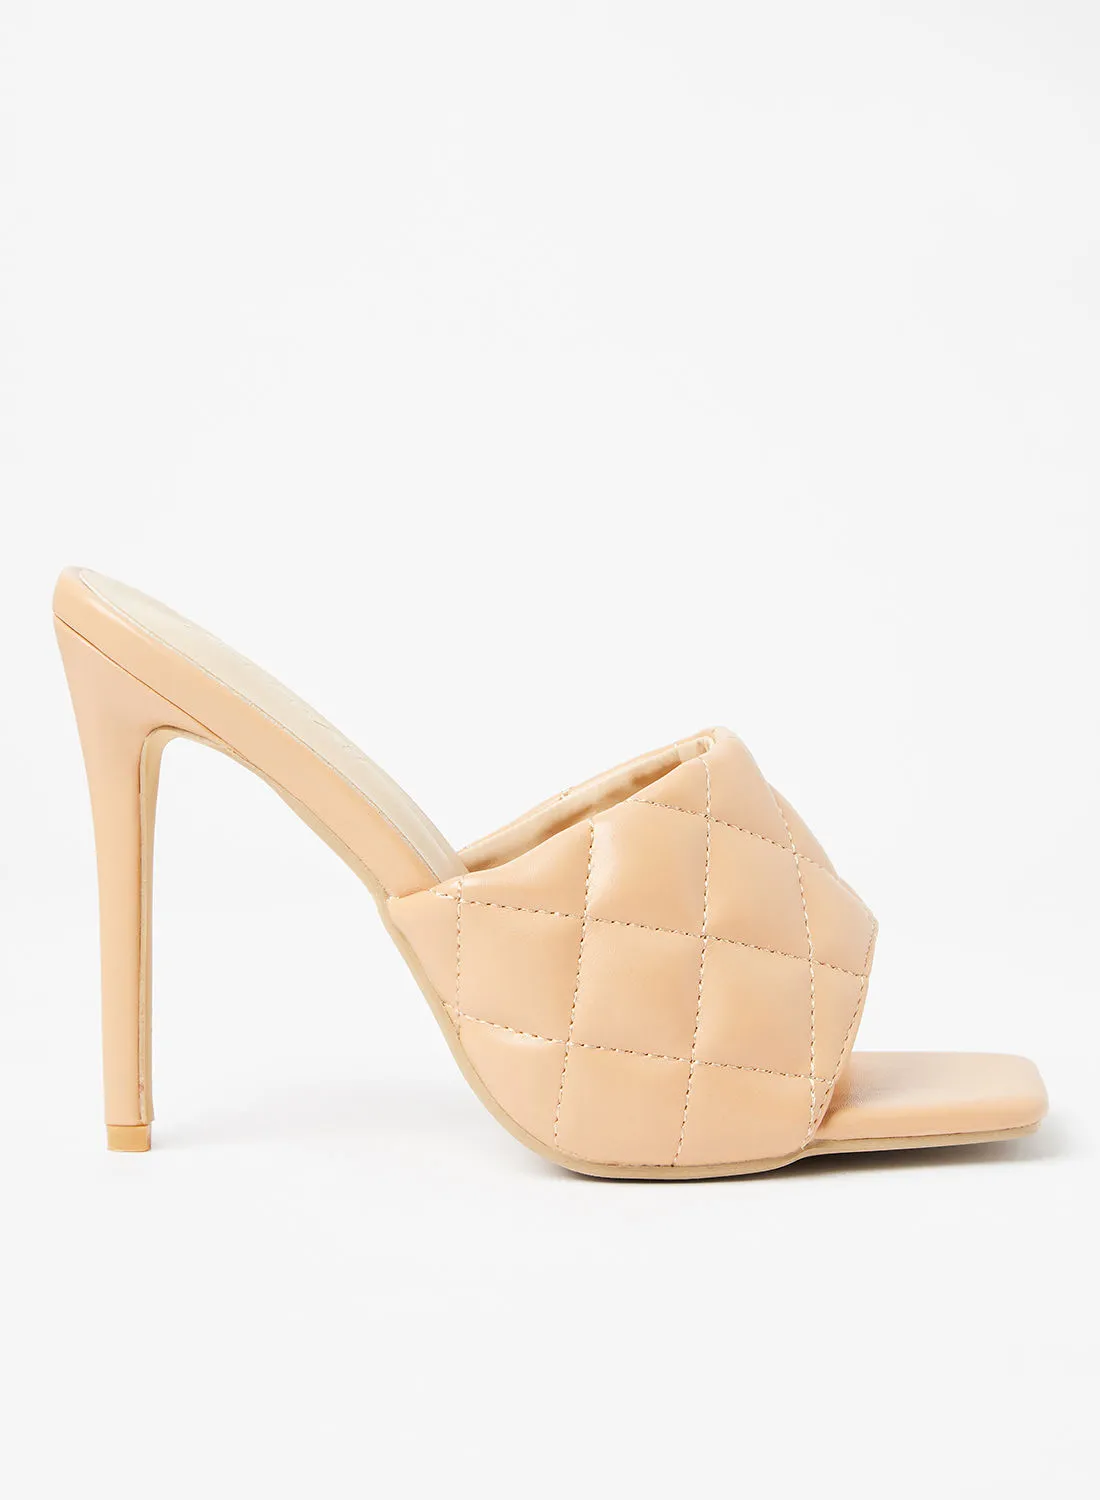 LABEL RAIL Quilted High Heel Sandals Nude